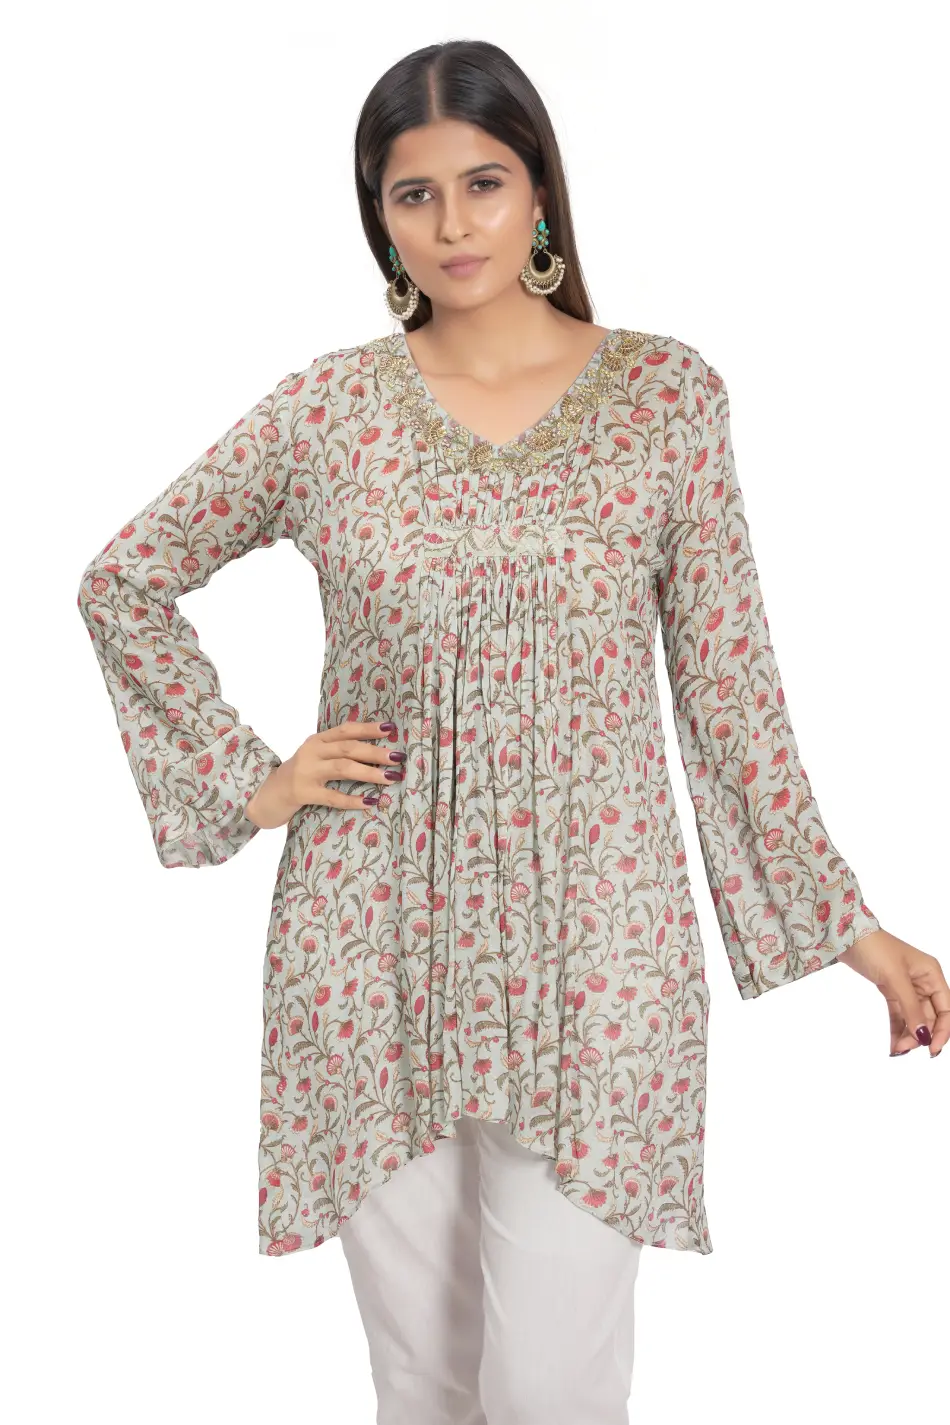 LIGHT BLUE PRINTED  HAND EMBROIDERED TUNIC